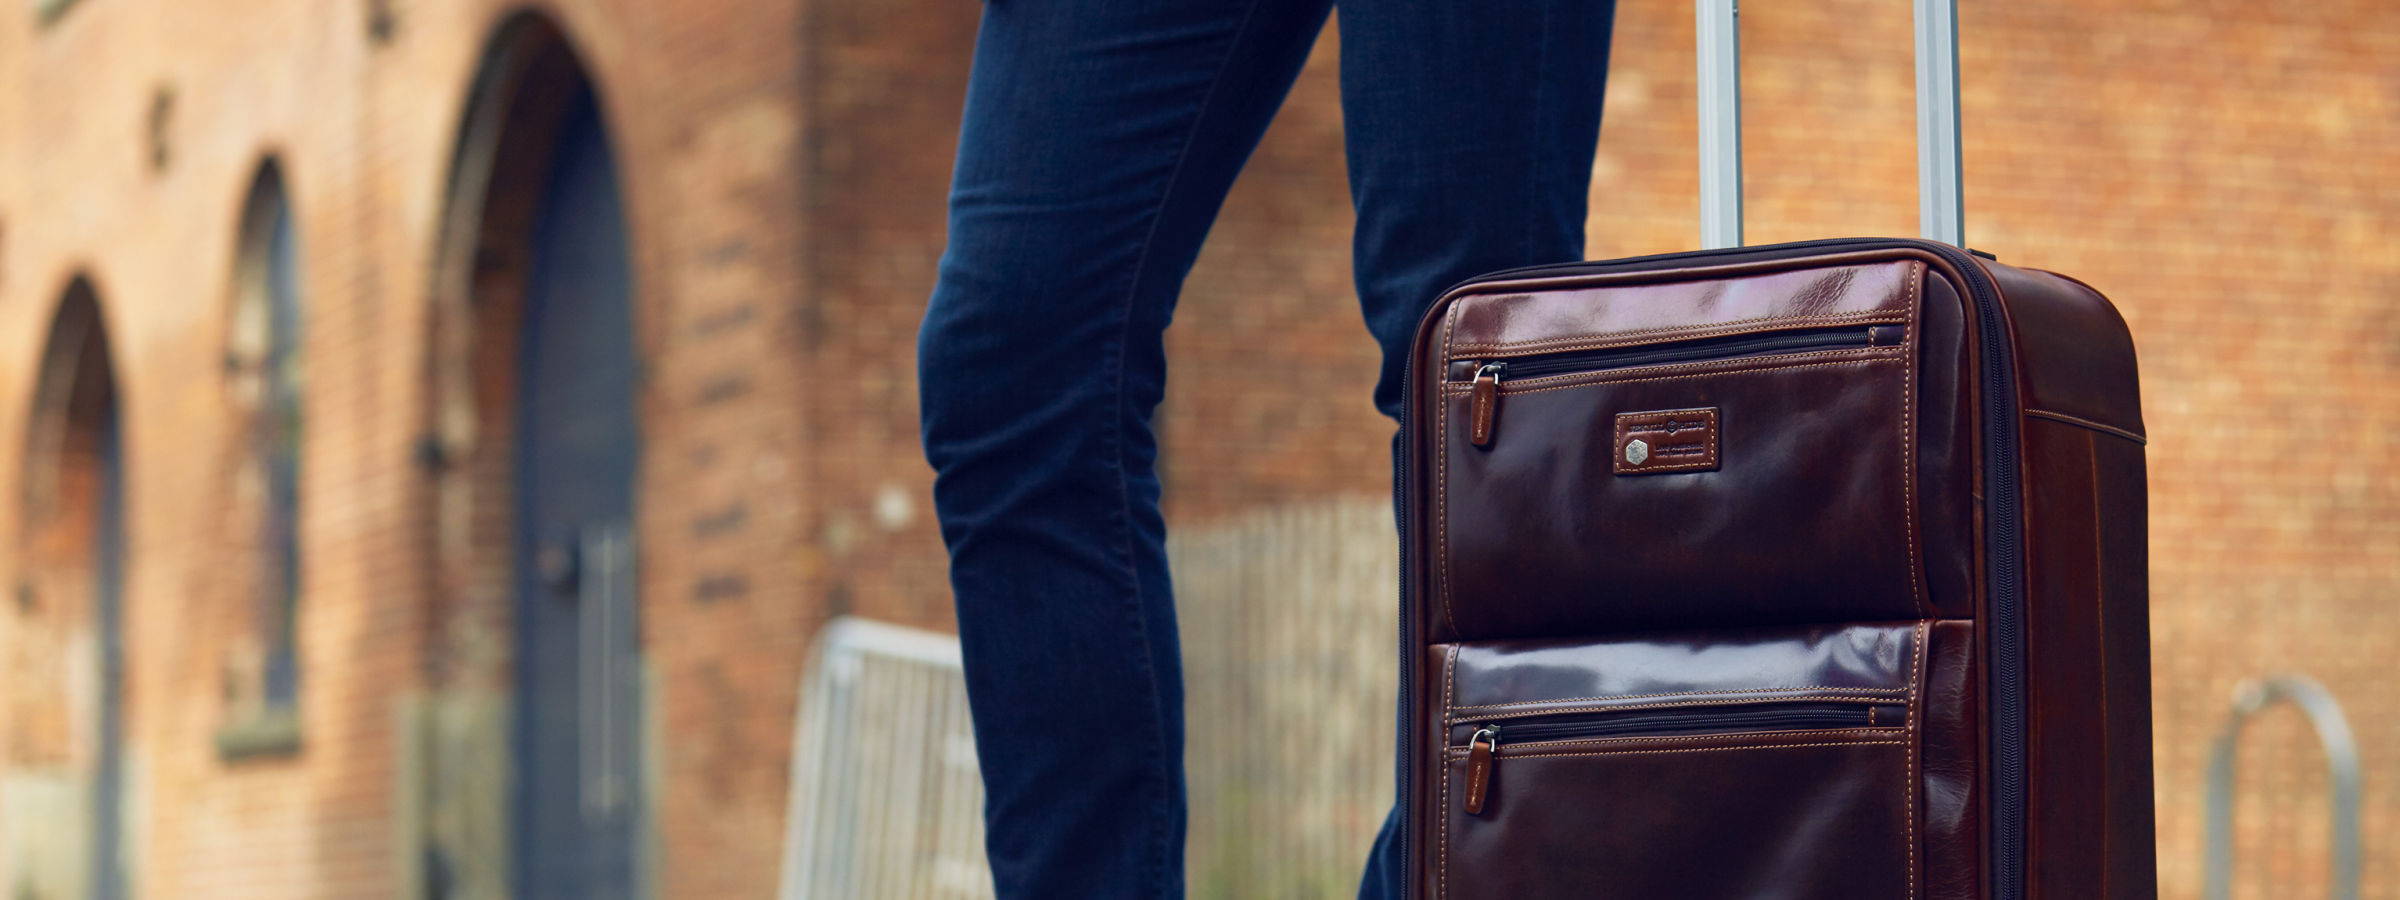 Men's Travel Bags | Jekyll & Hide Leather UK | Shop Leather Online 